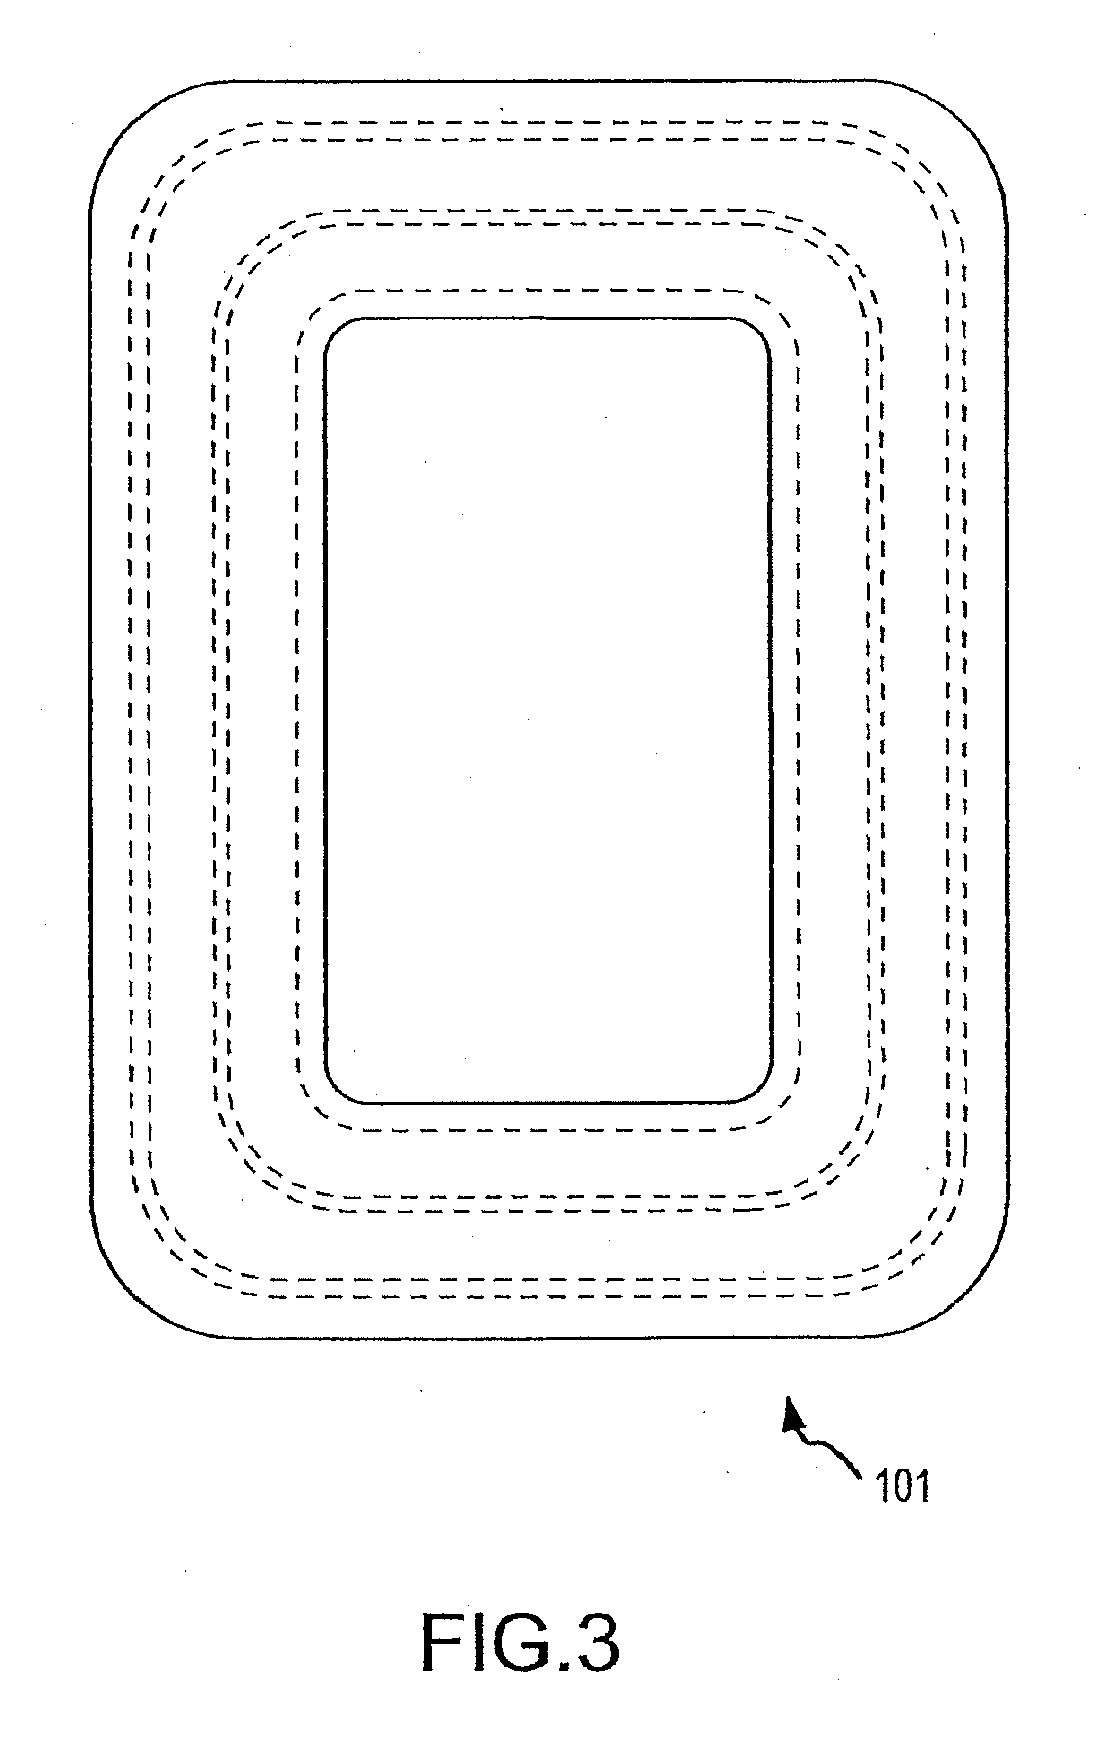 Container Having A Rim Or Other Feature Encapsulated By Or Formed From Injection-Molded Material